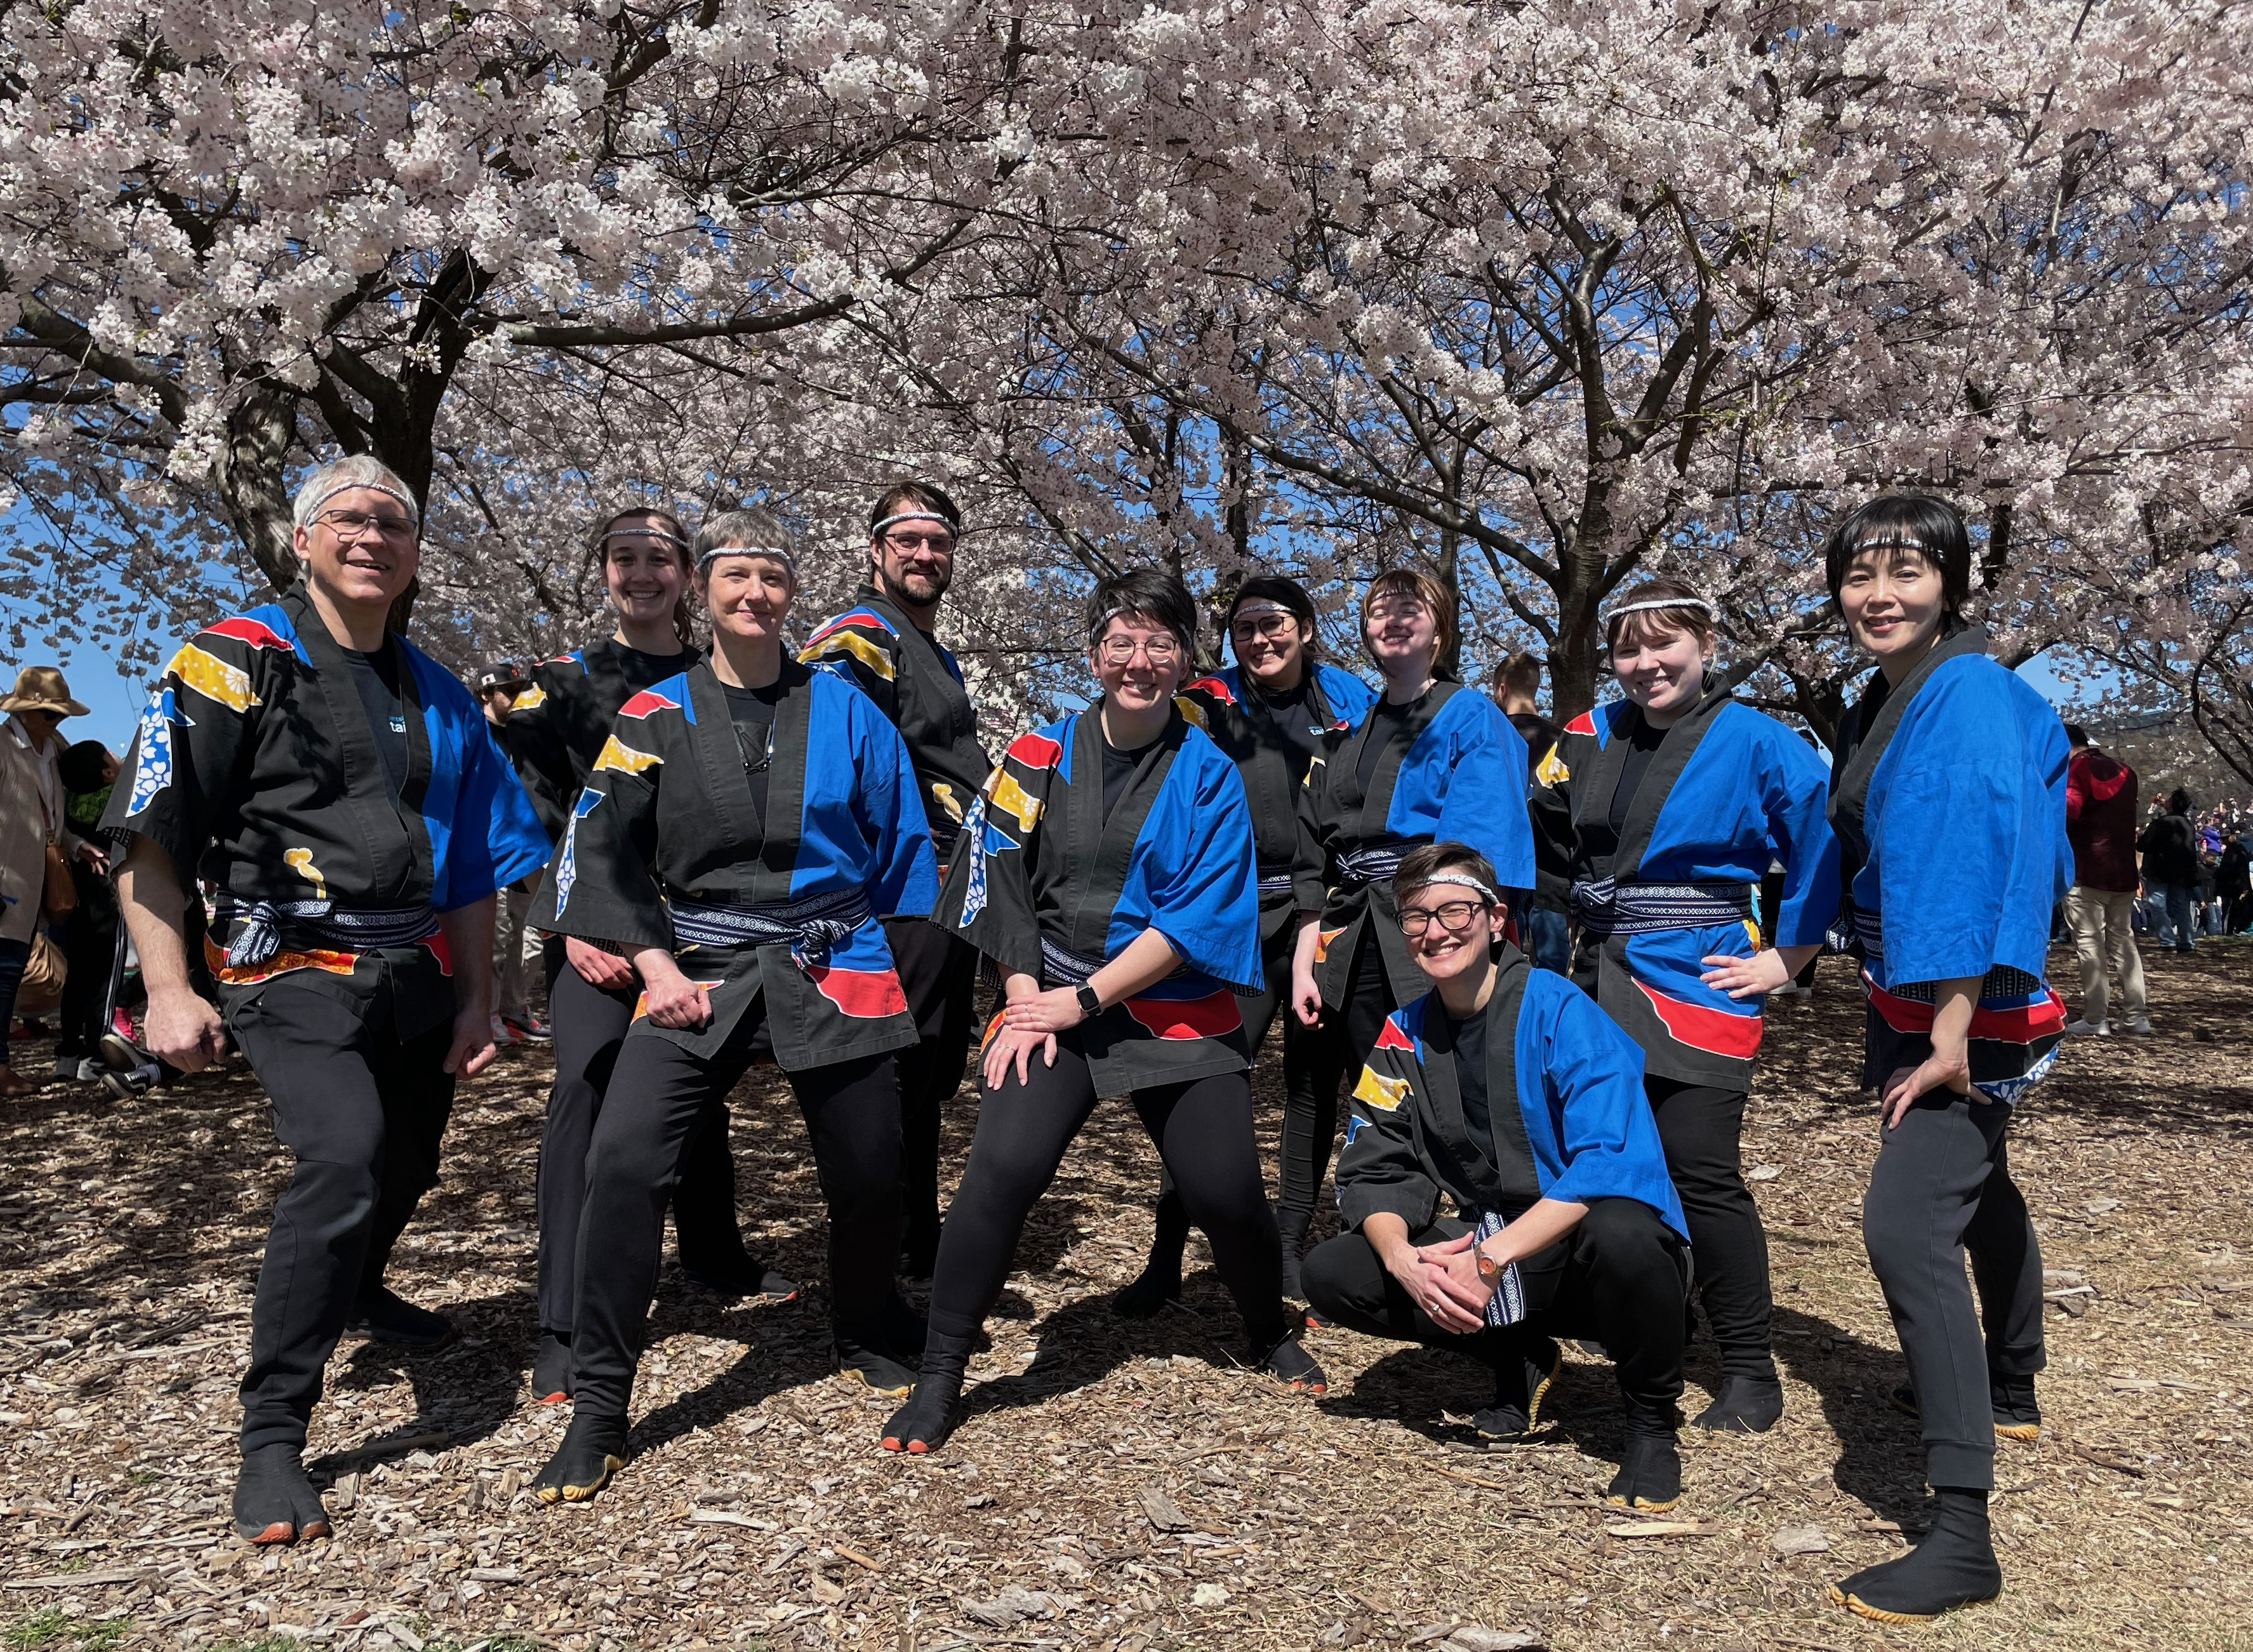 Group photo of Pittsburgh Taiko members in blue hanten costumes in front of blooming cherry trees.